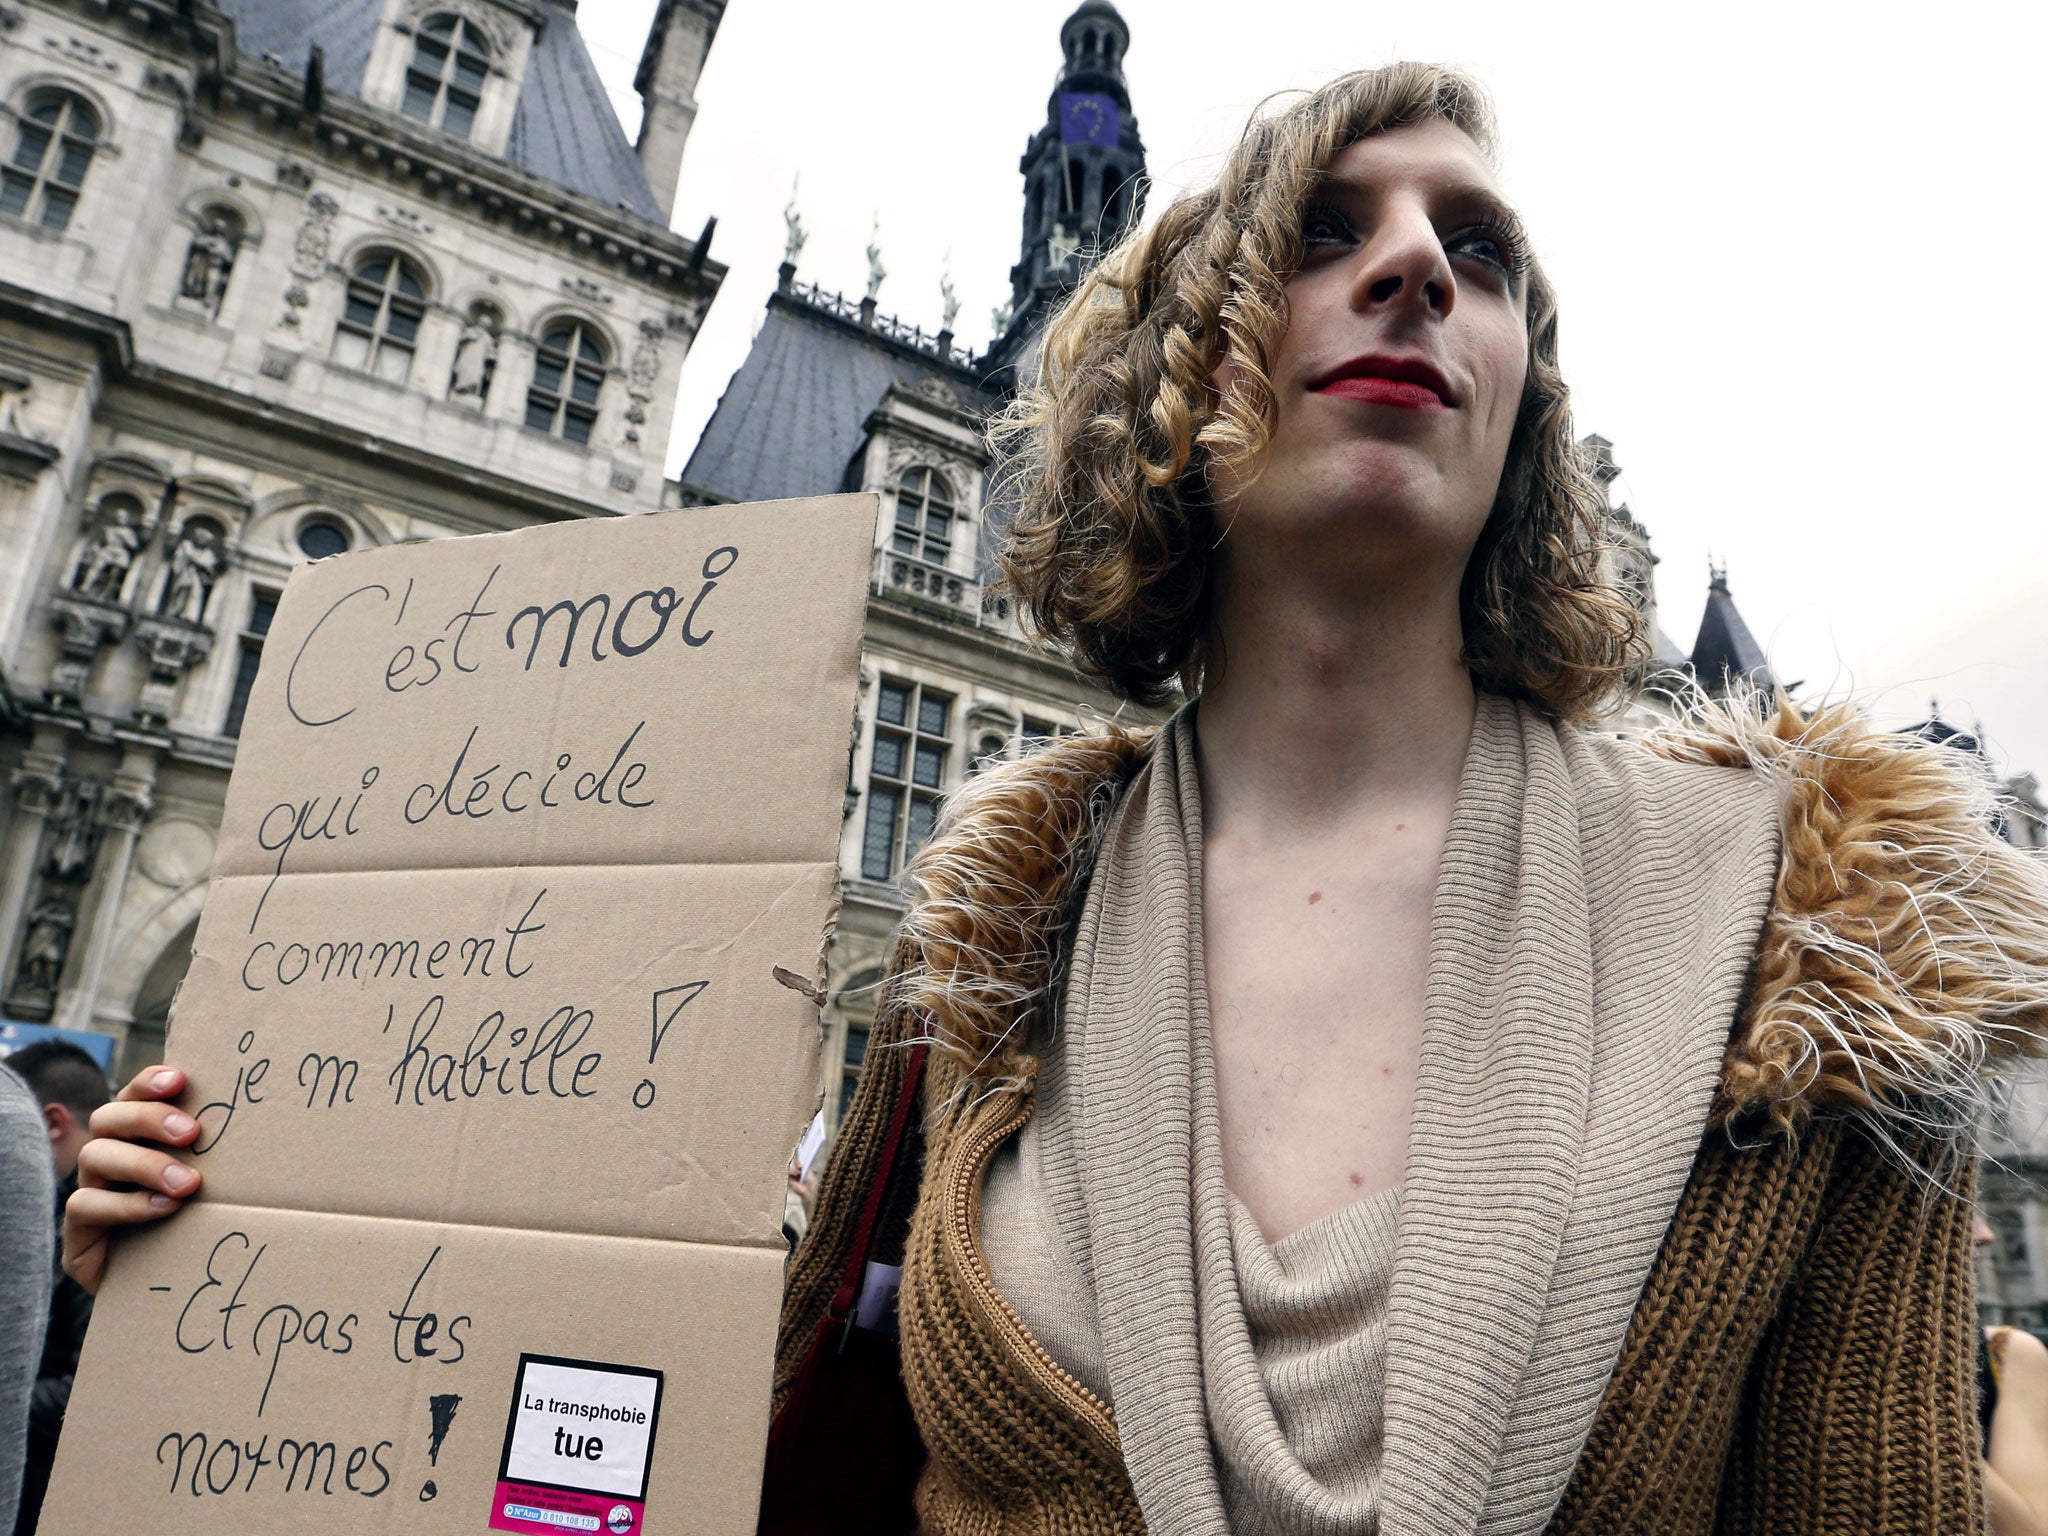 The placard reads 'I am the one who decide how I dress and not your standards'. Photo taken at the 16th Existrans, a parade to fight for the rights of transsexual and transgender people on October 20, 2012 in Paris.